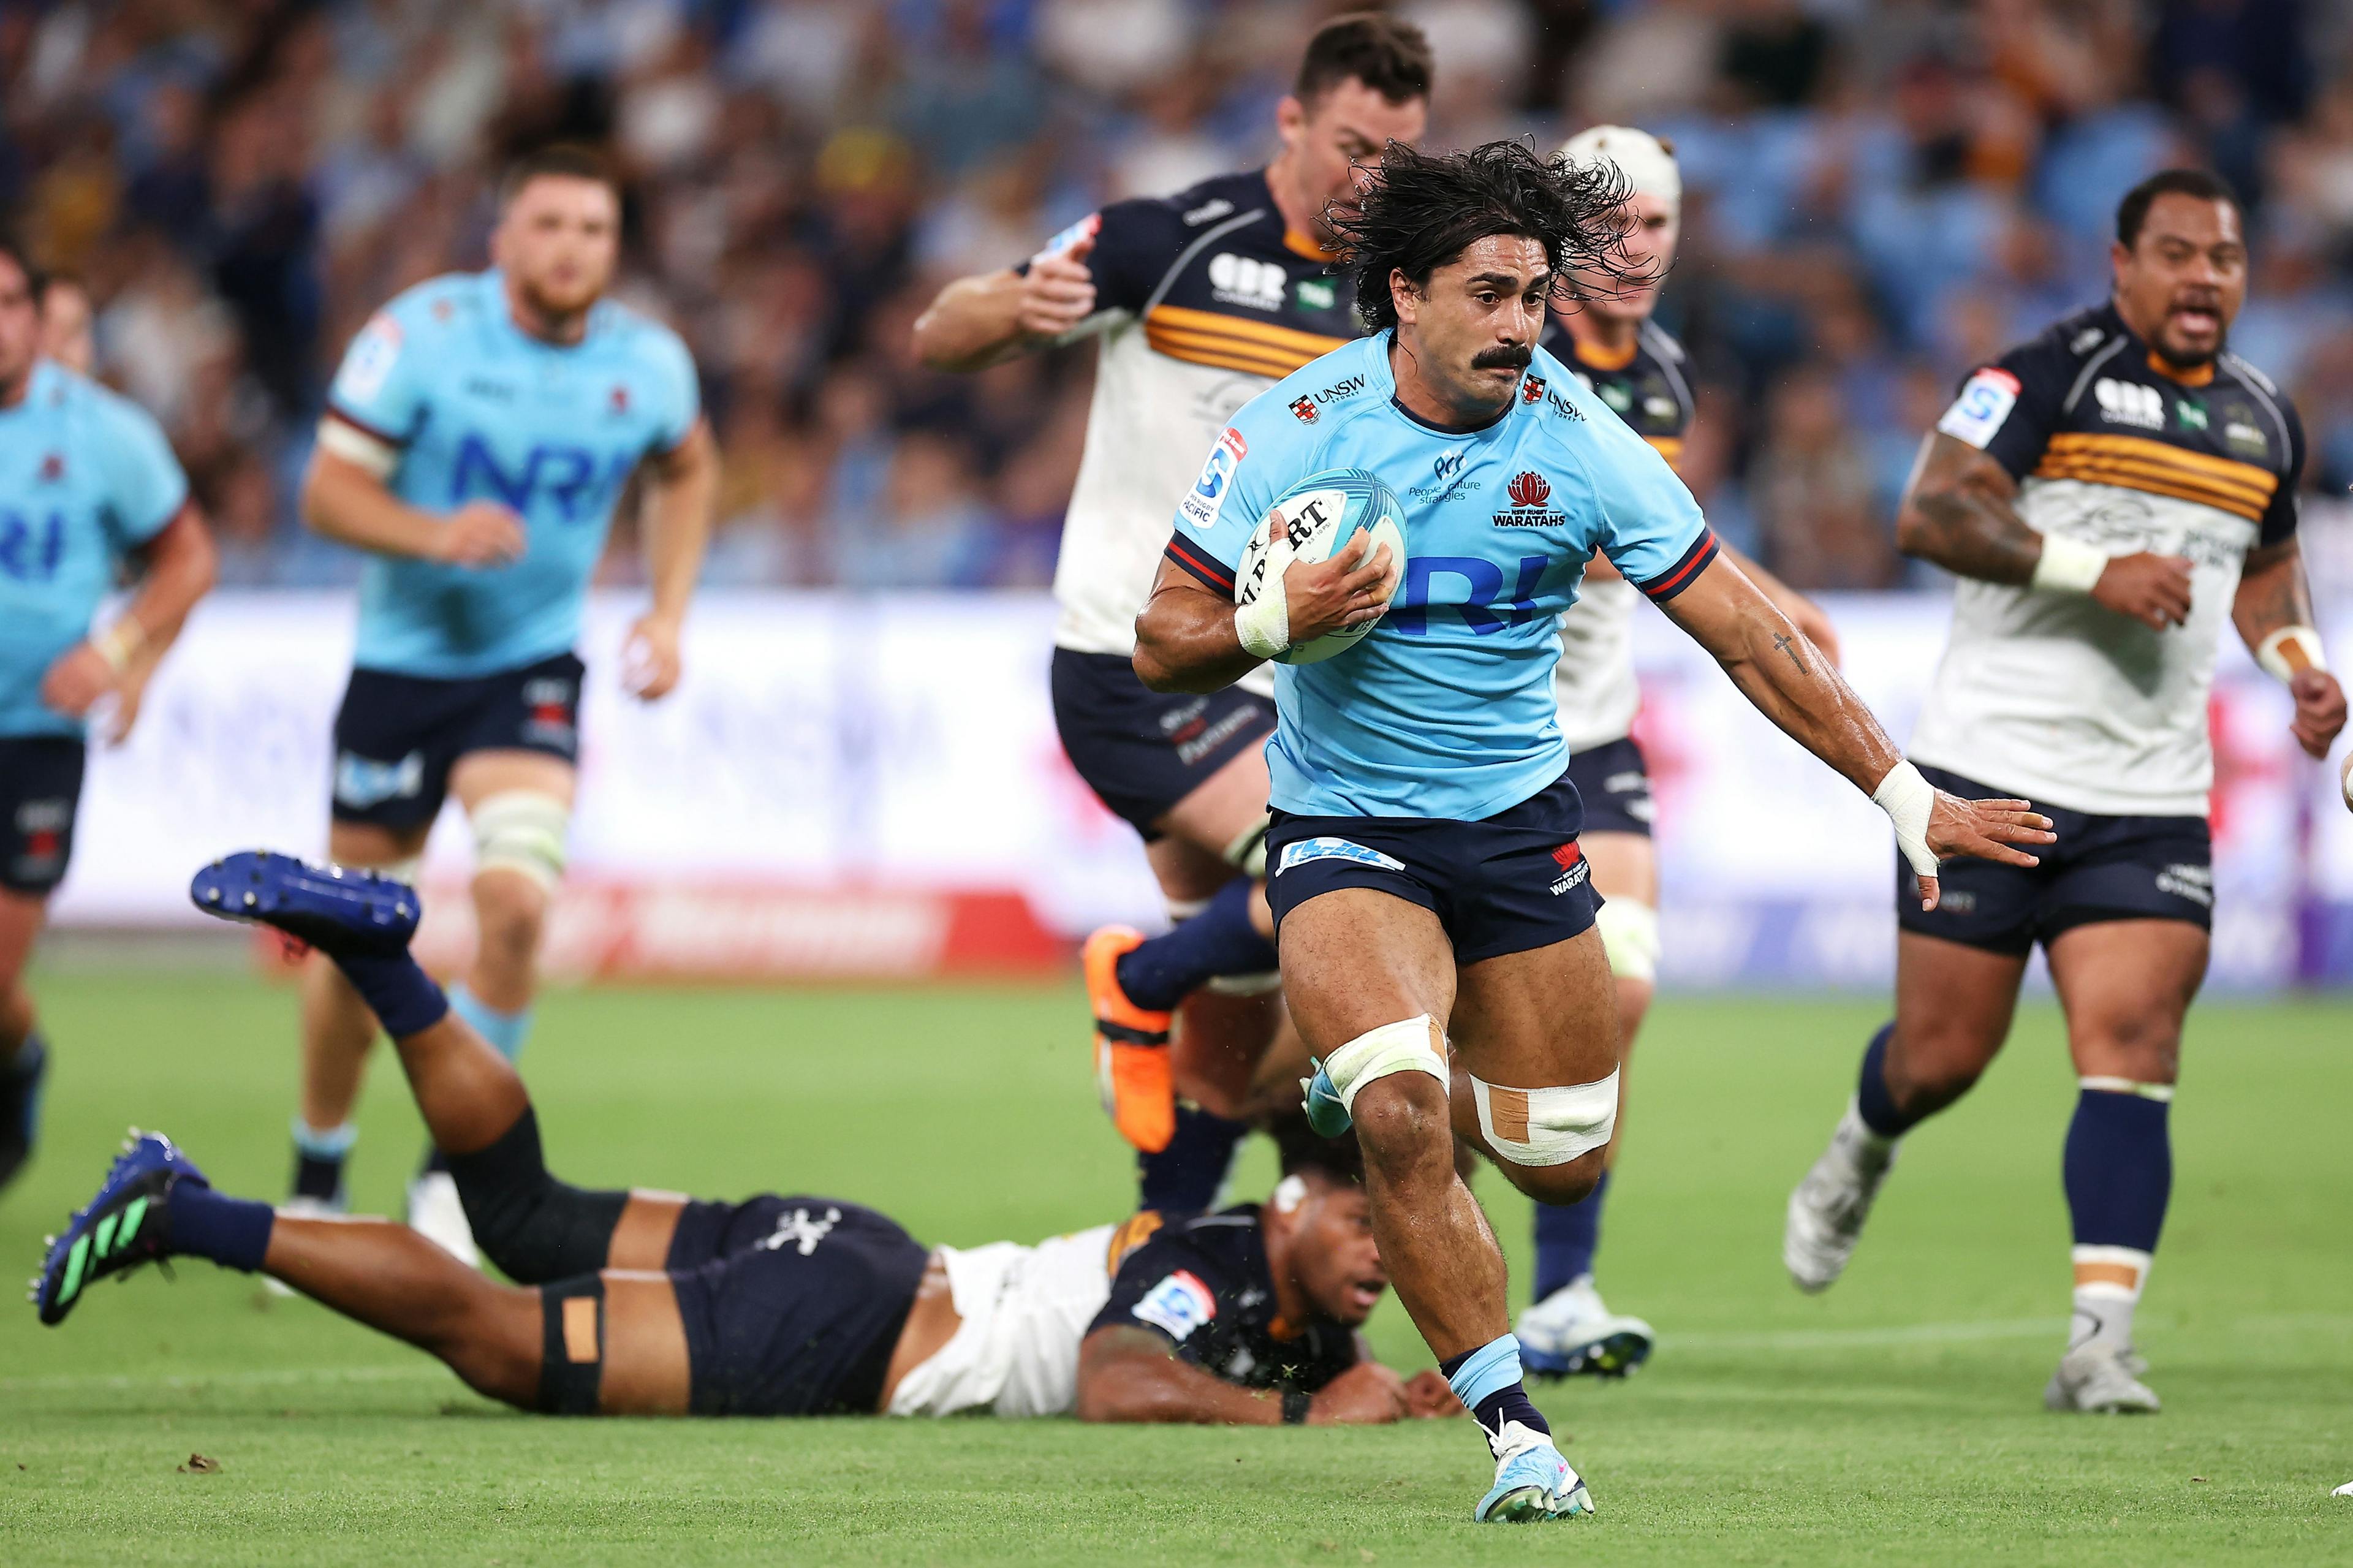 Charlie Gamble has re-signed with the Waratahs, keeping him in sky blue until 2024